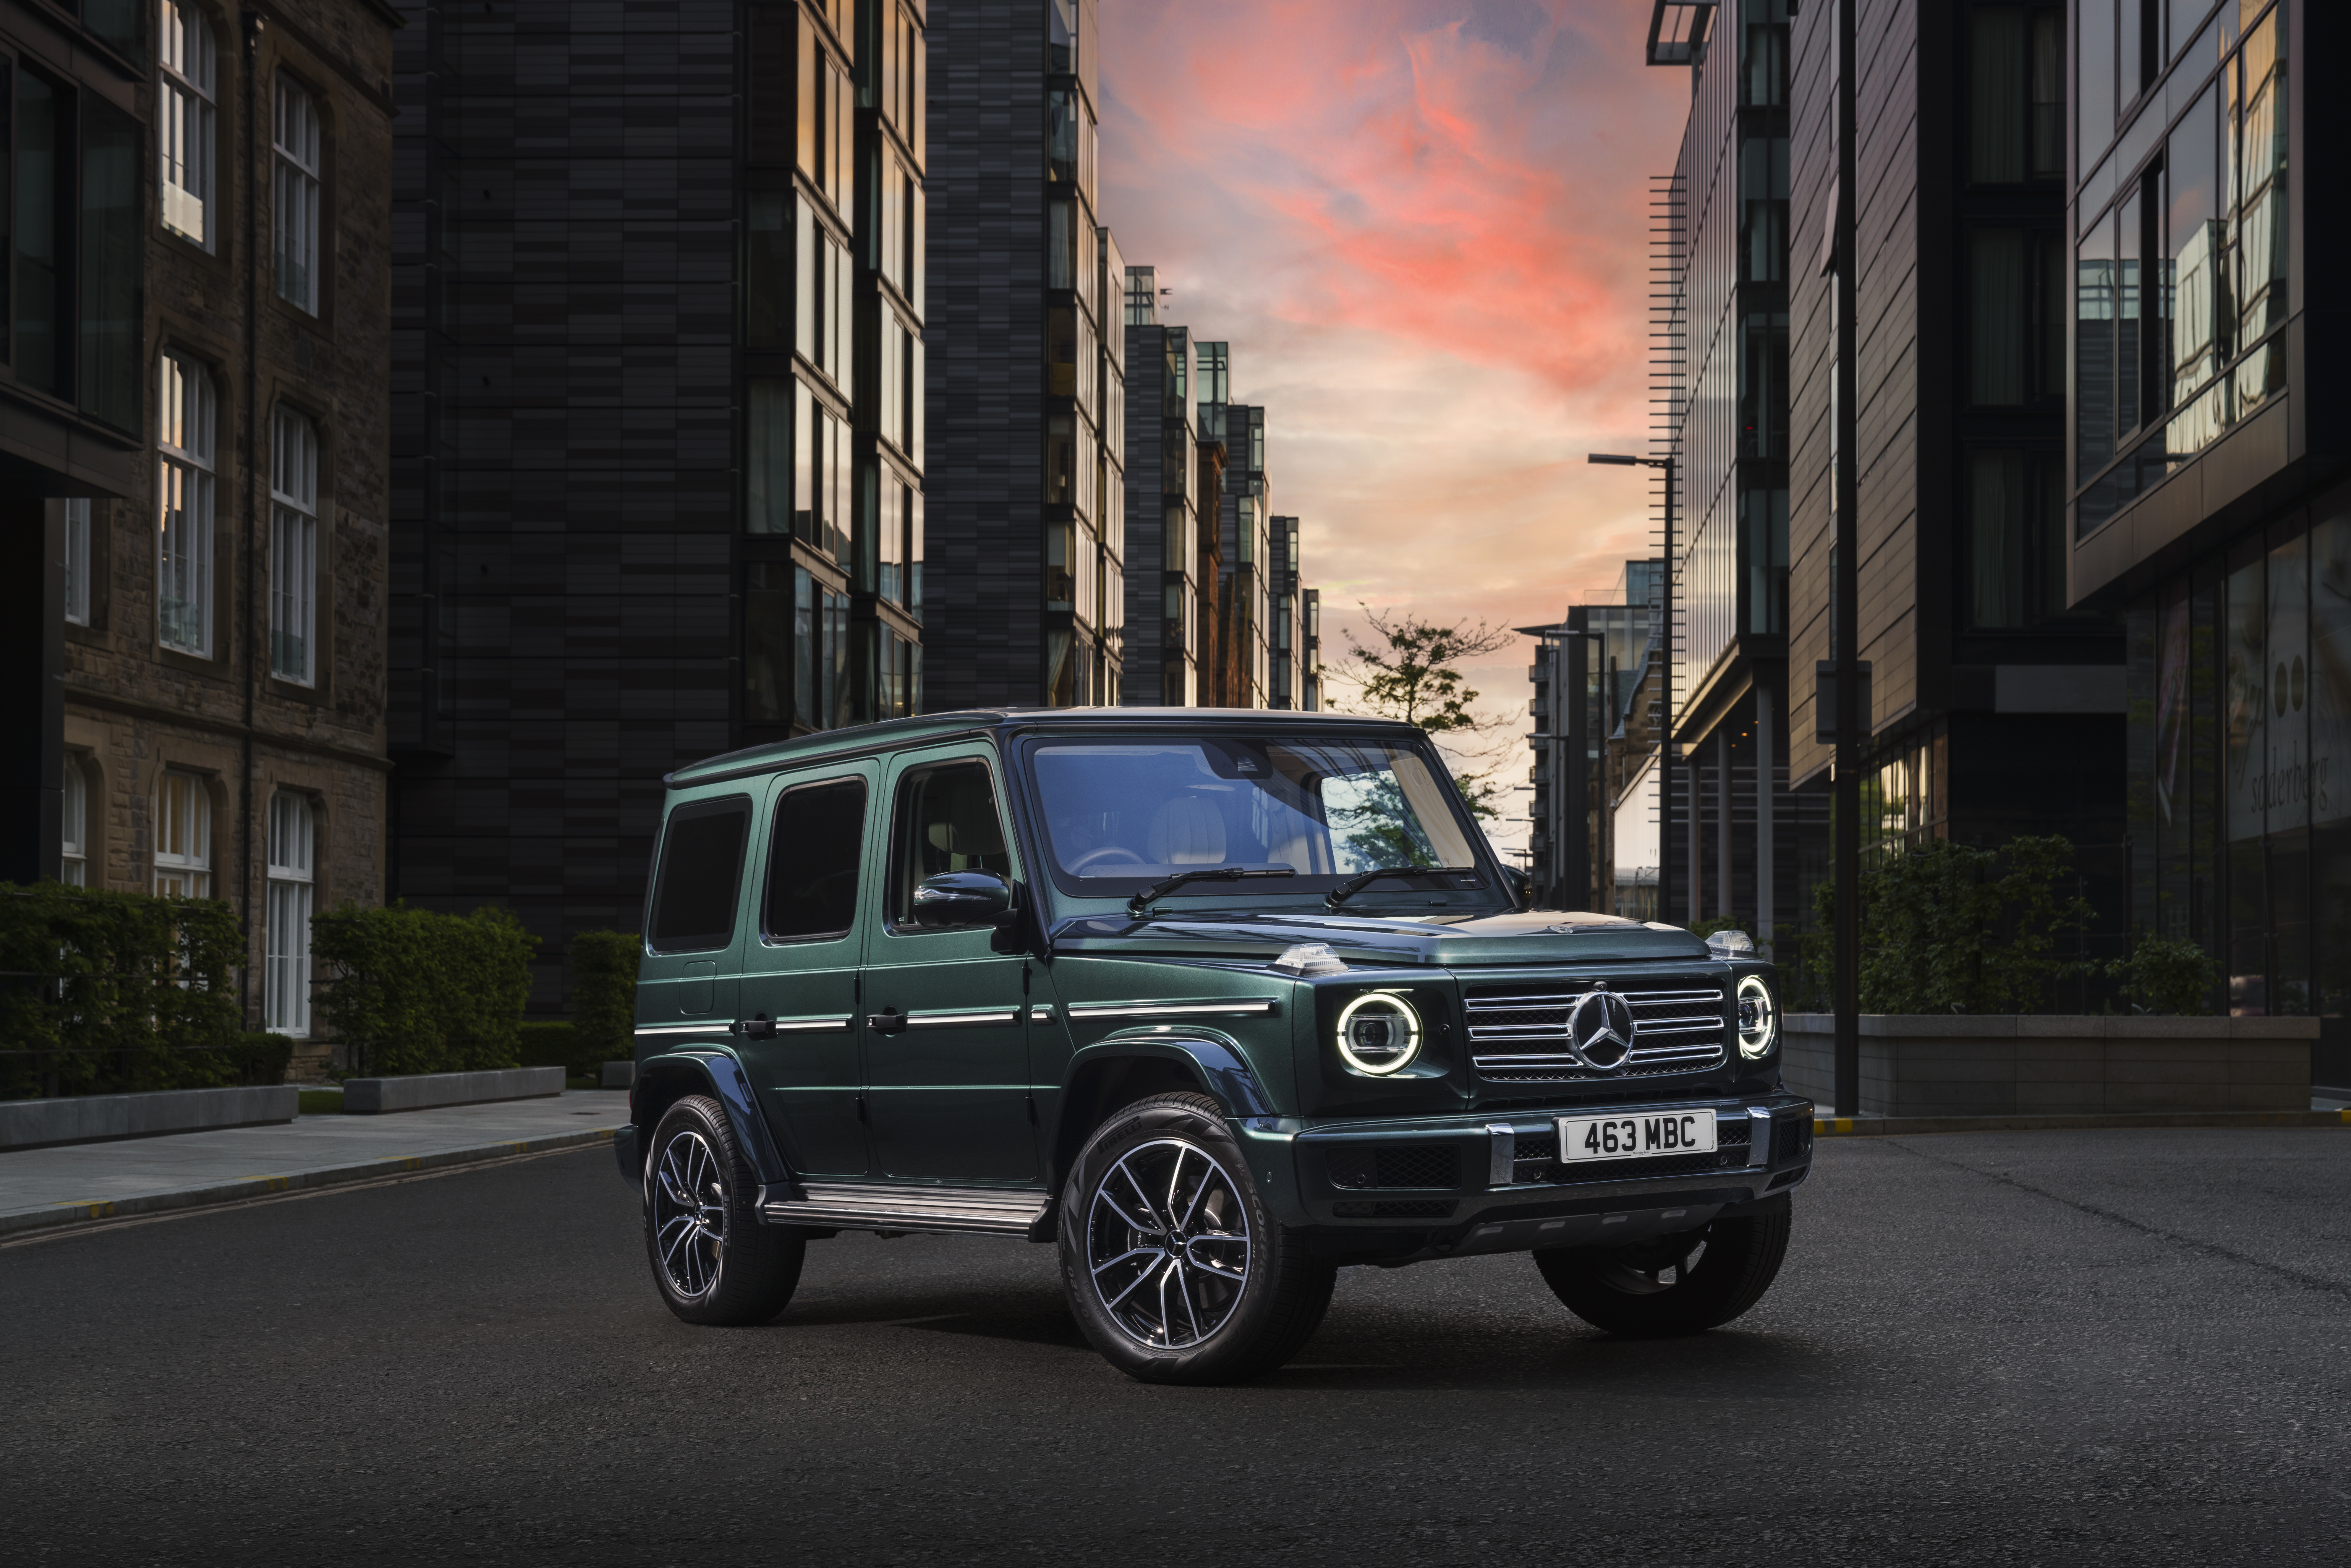 40+ Mercedes-Benz G-Class HD Wallpapers and Backgrounds